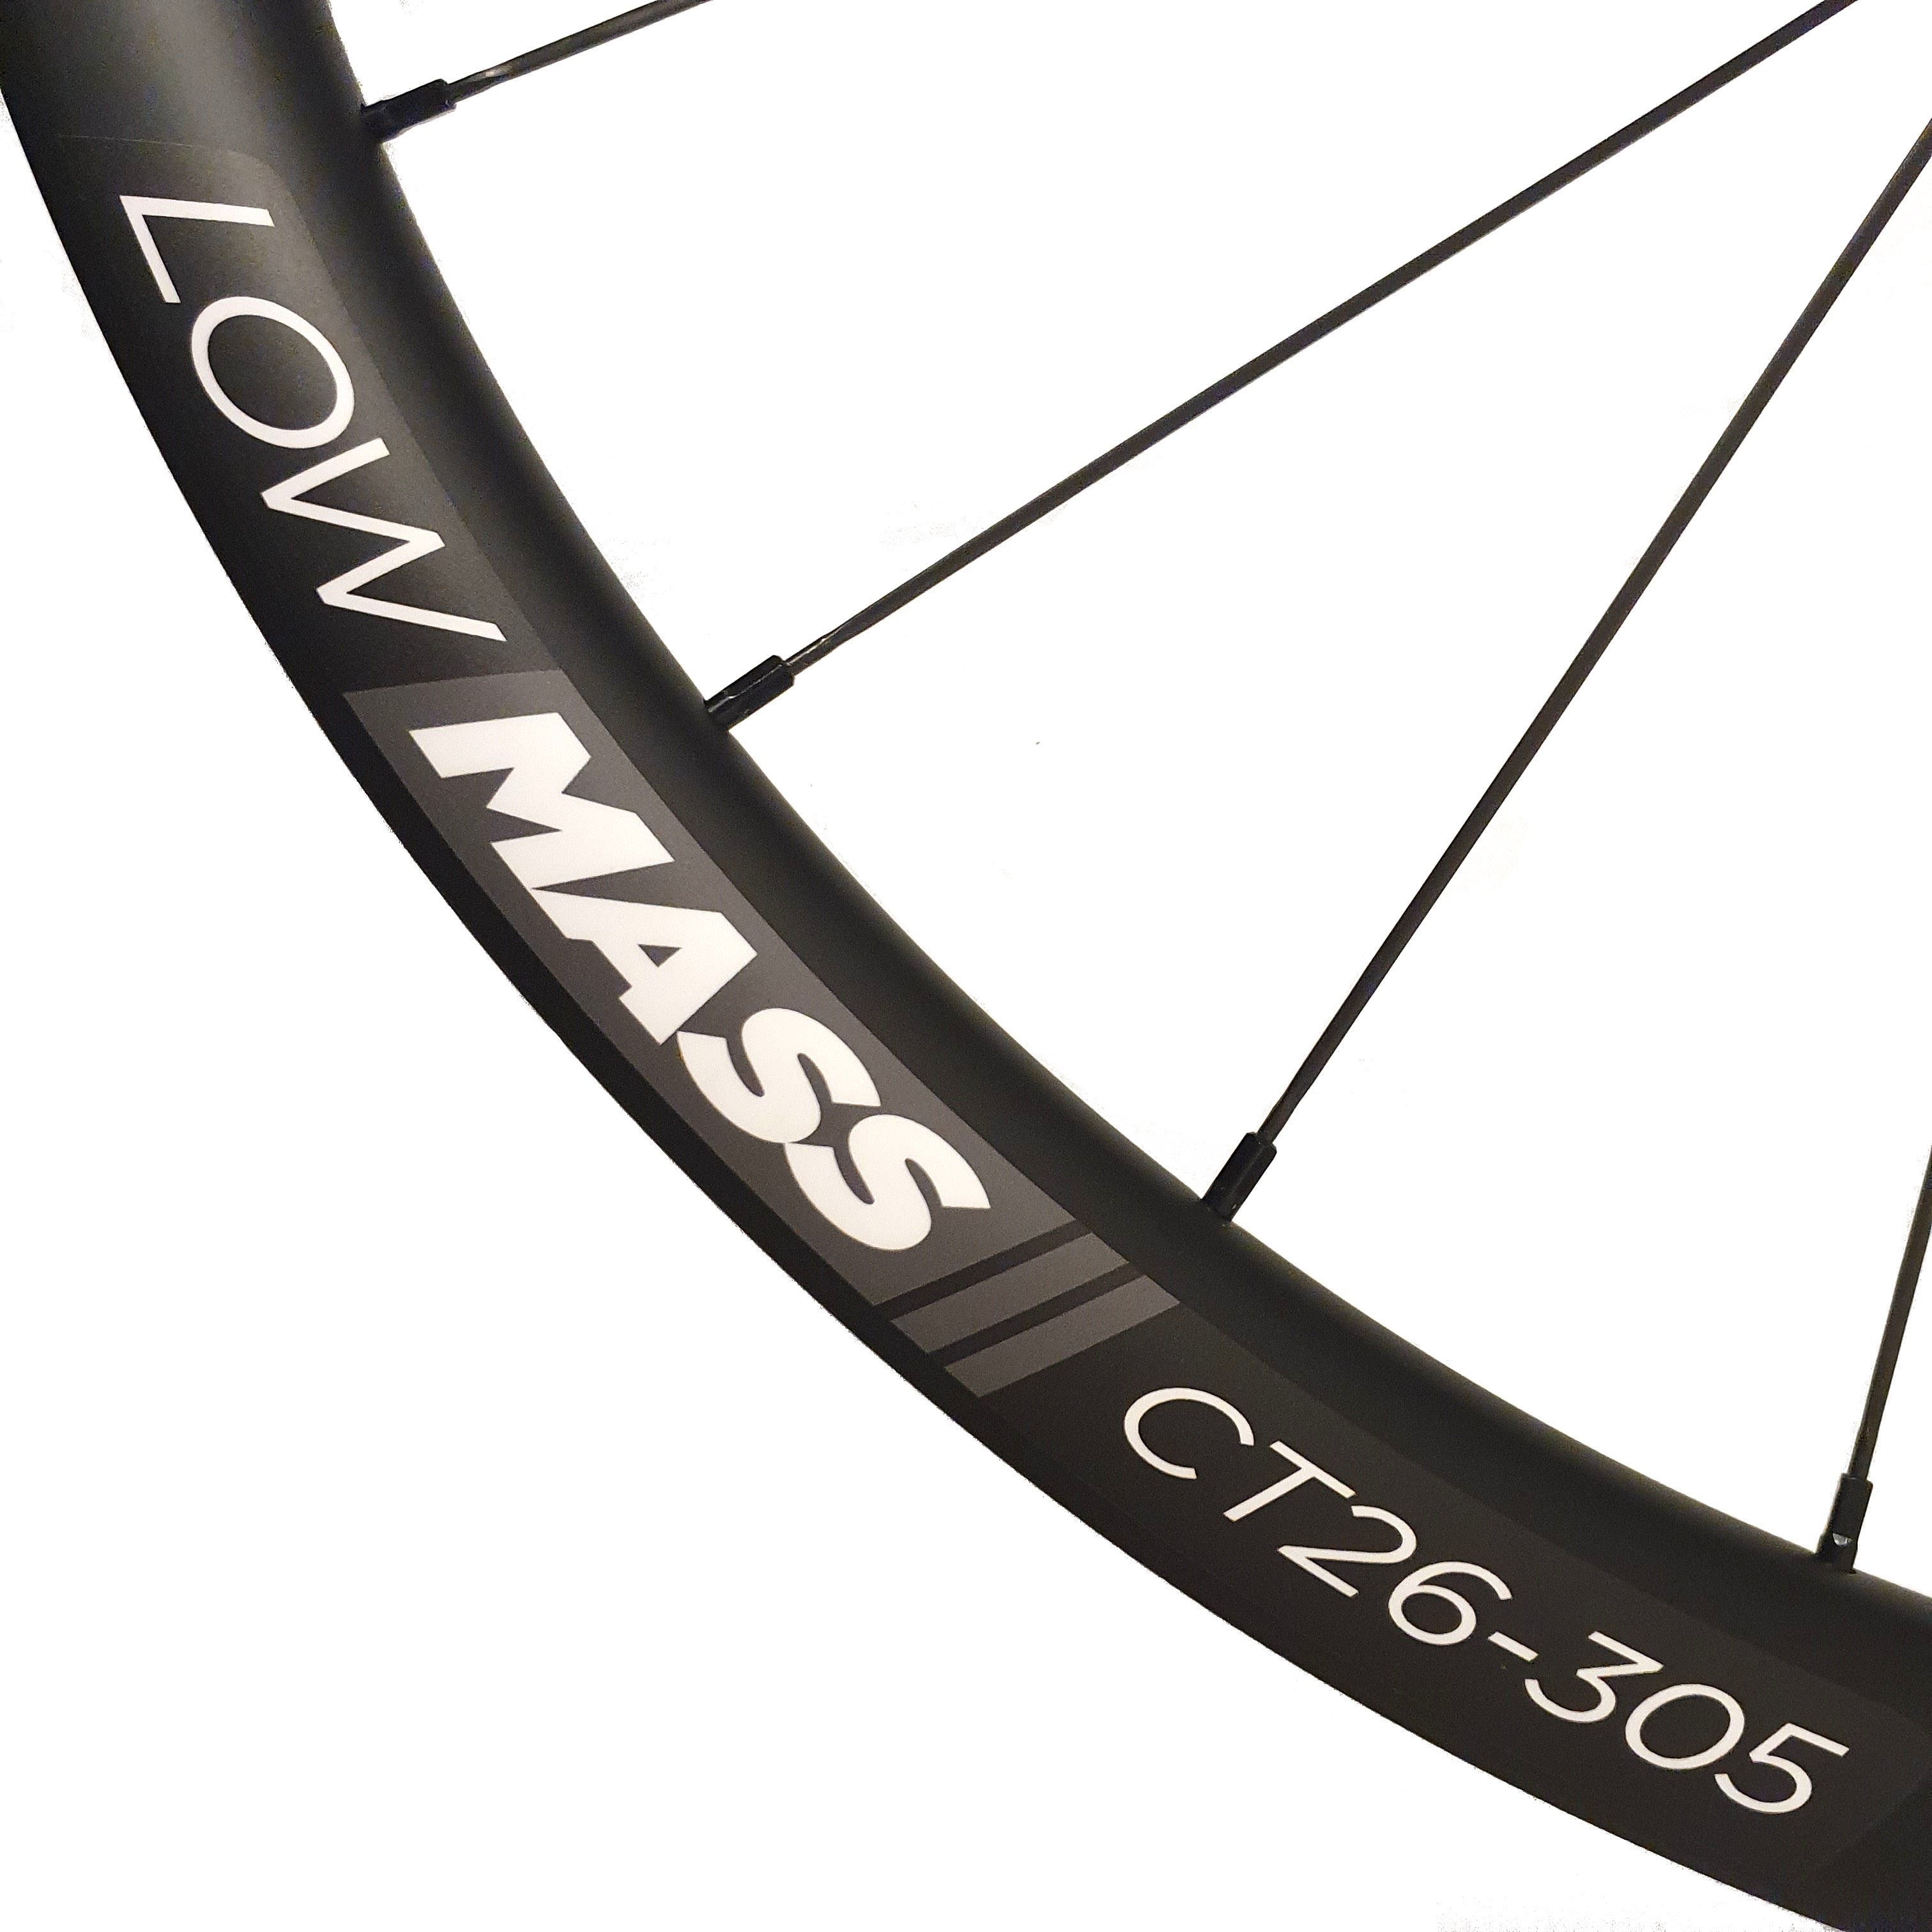 Archived 12/21 - LOWMASS CT26-305 Carbon Tubular Cyclo Cross Disc Wheelset